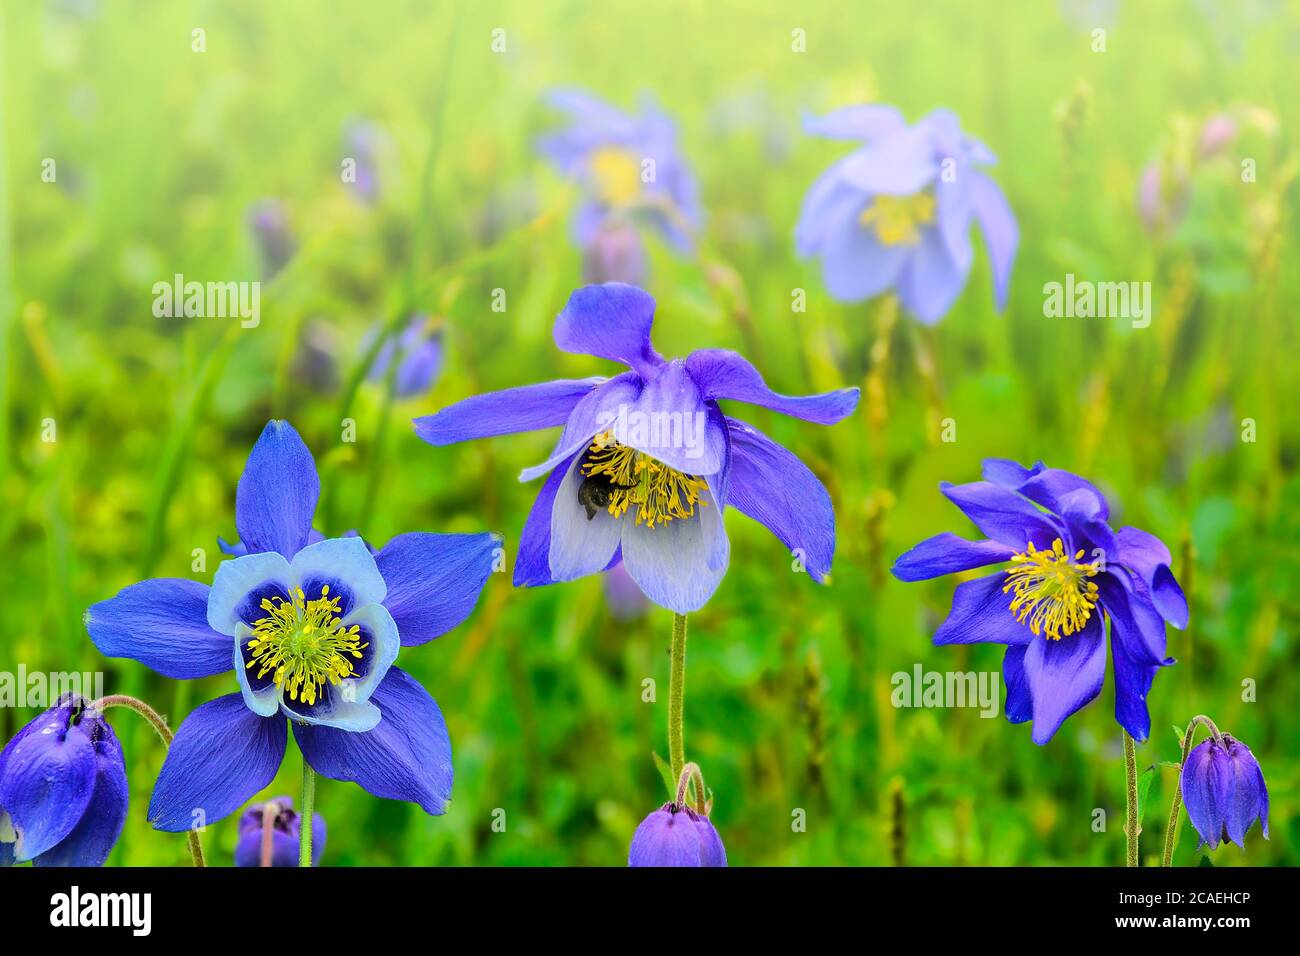 Beautiful blue wildflowers Aquilegia glandulosa close up, growing in alpine weadows of Altai mountains, Russia. Selective focus on flowers. Beauty of Stock Photo